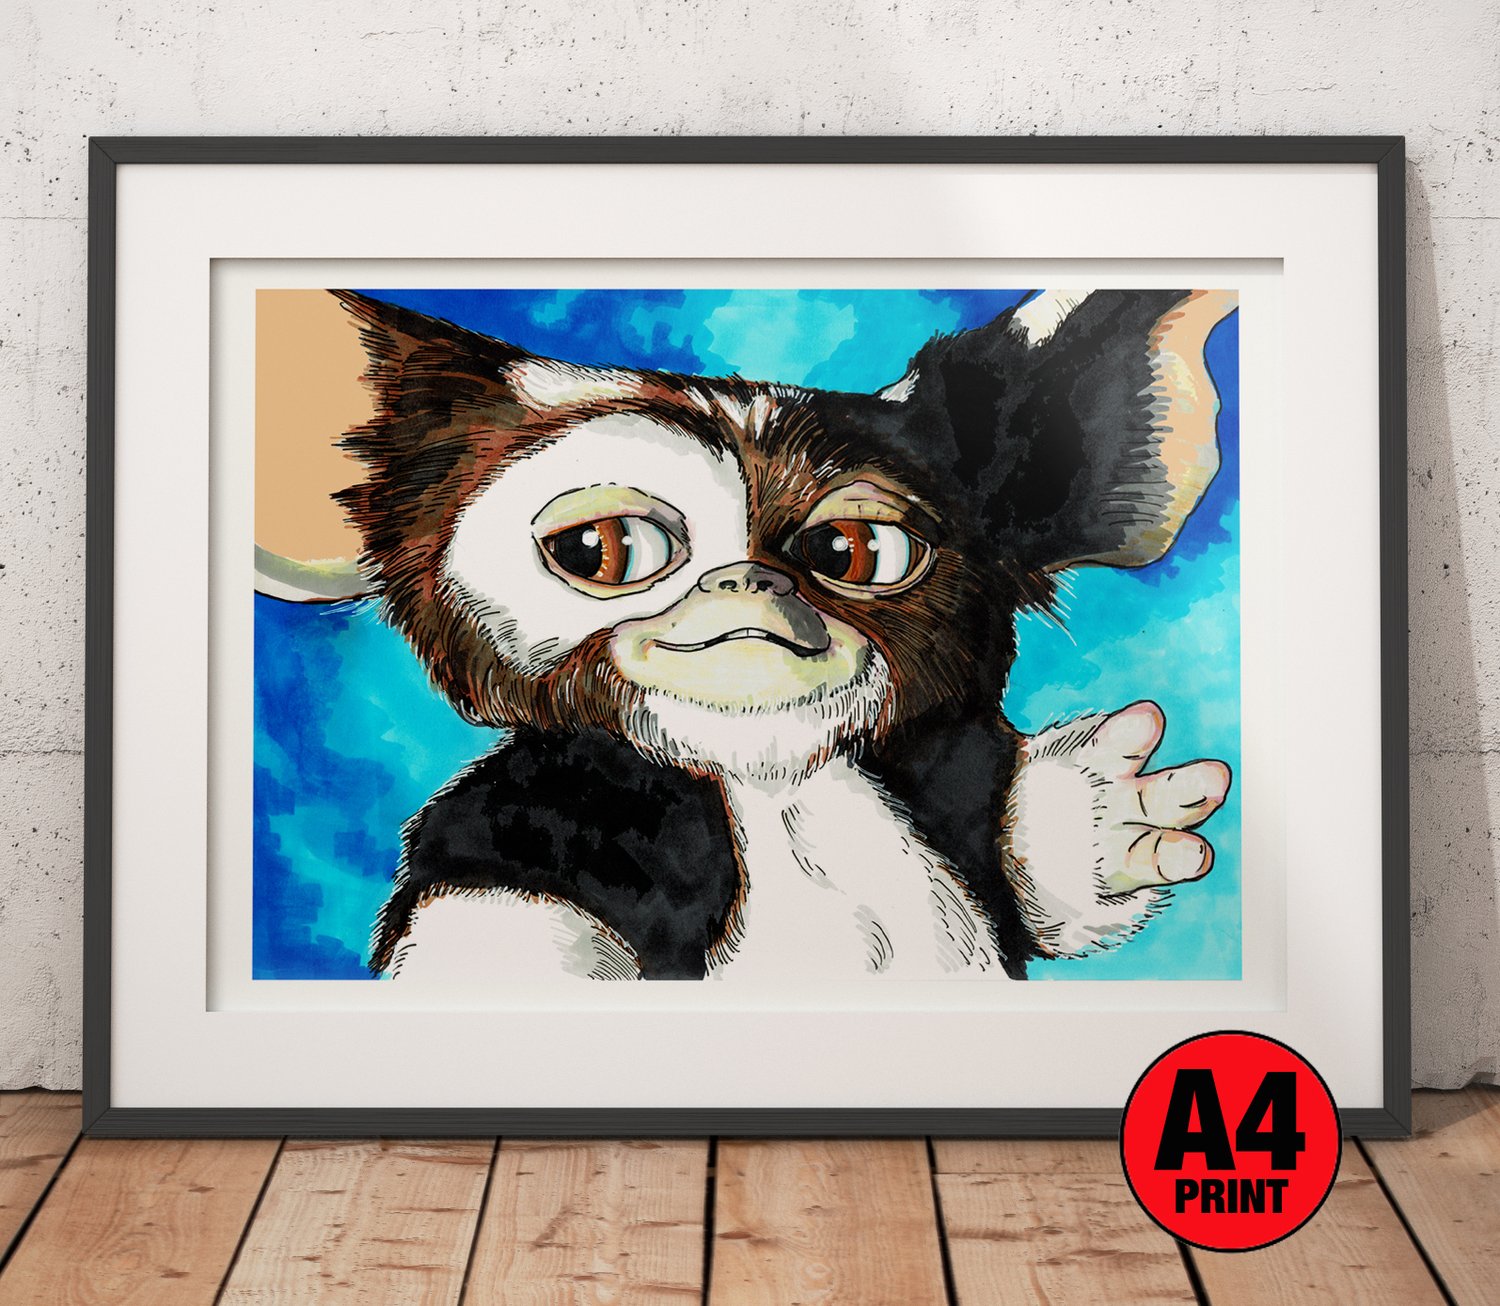 Gremlins 'Gizmo' A4 (12' x 8') Signed Print Comic Style Illustration